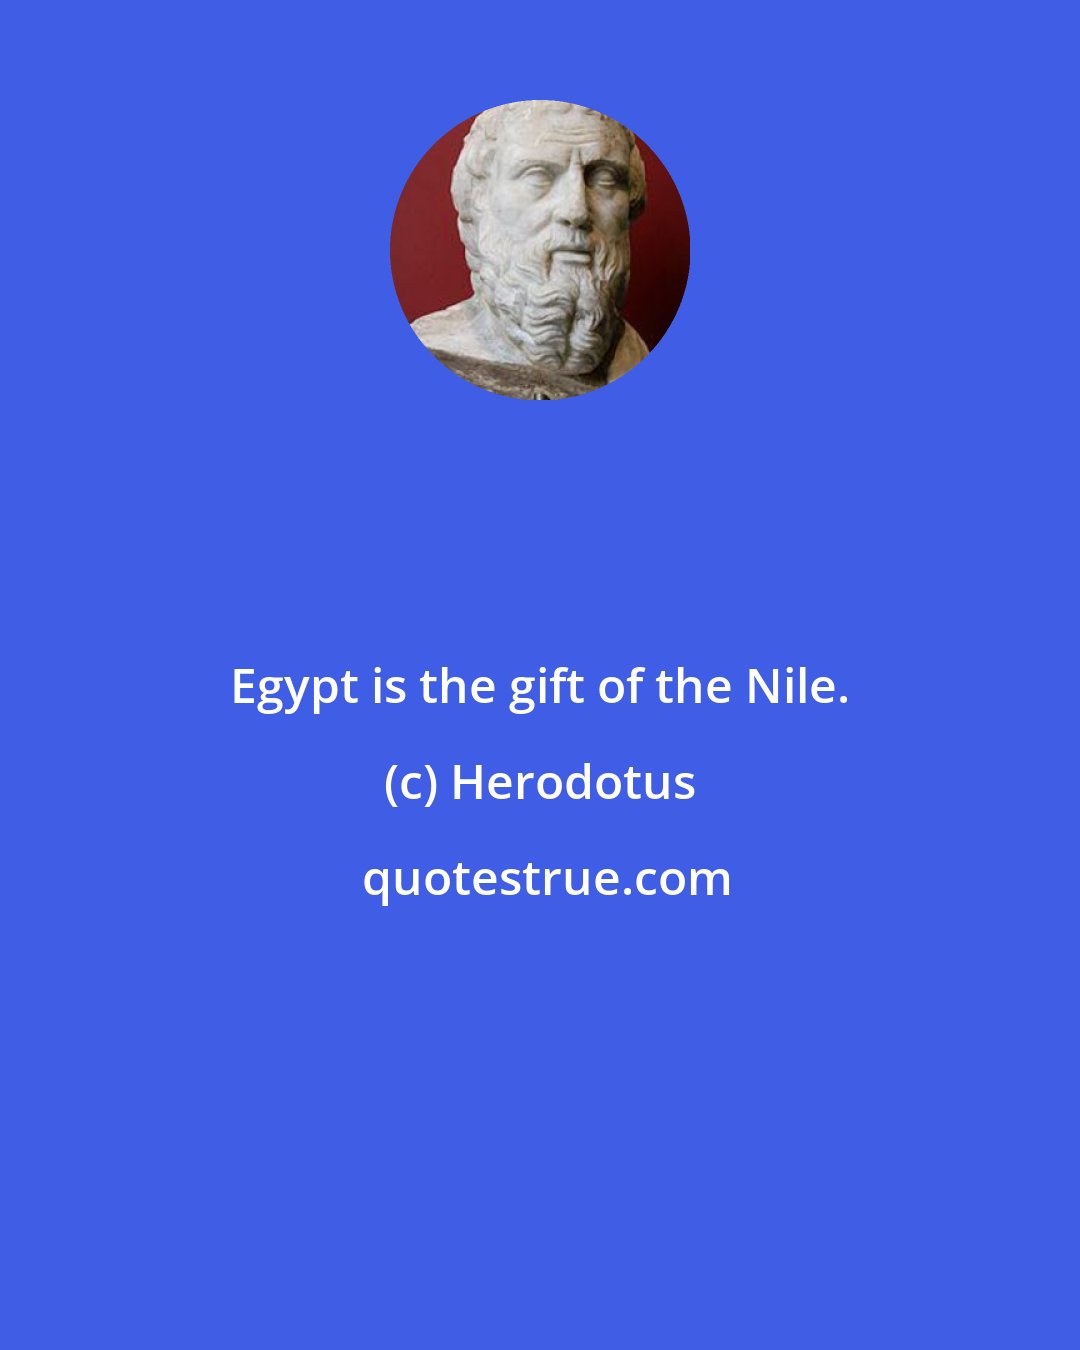 Herodotus: Egypt is the gift of the Nile.